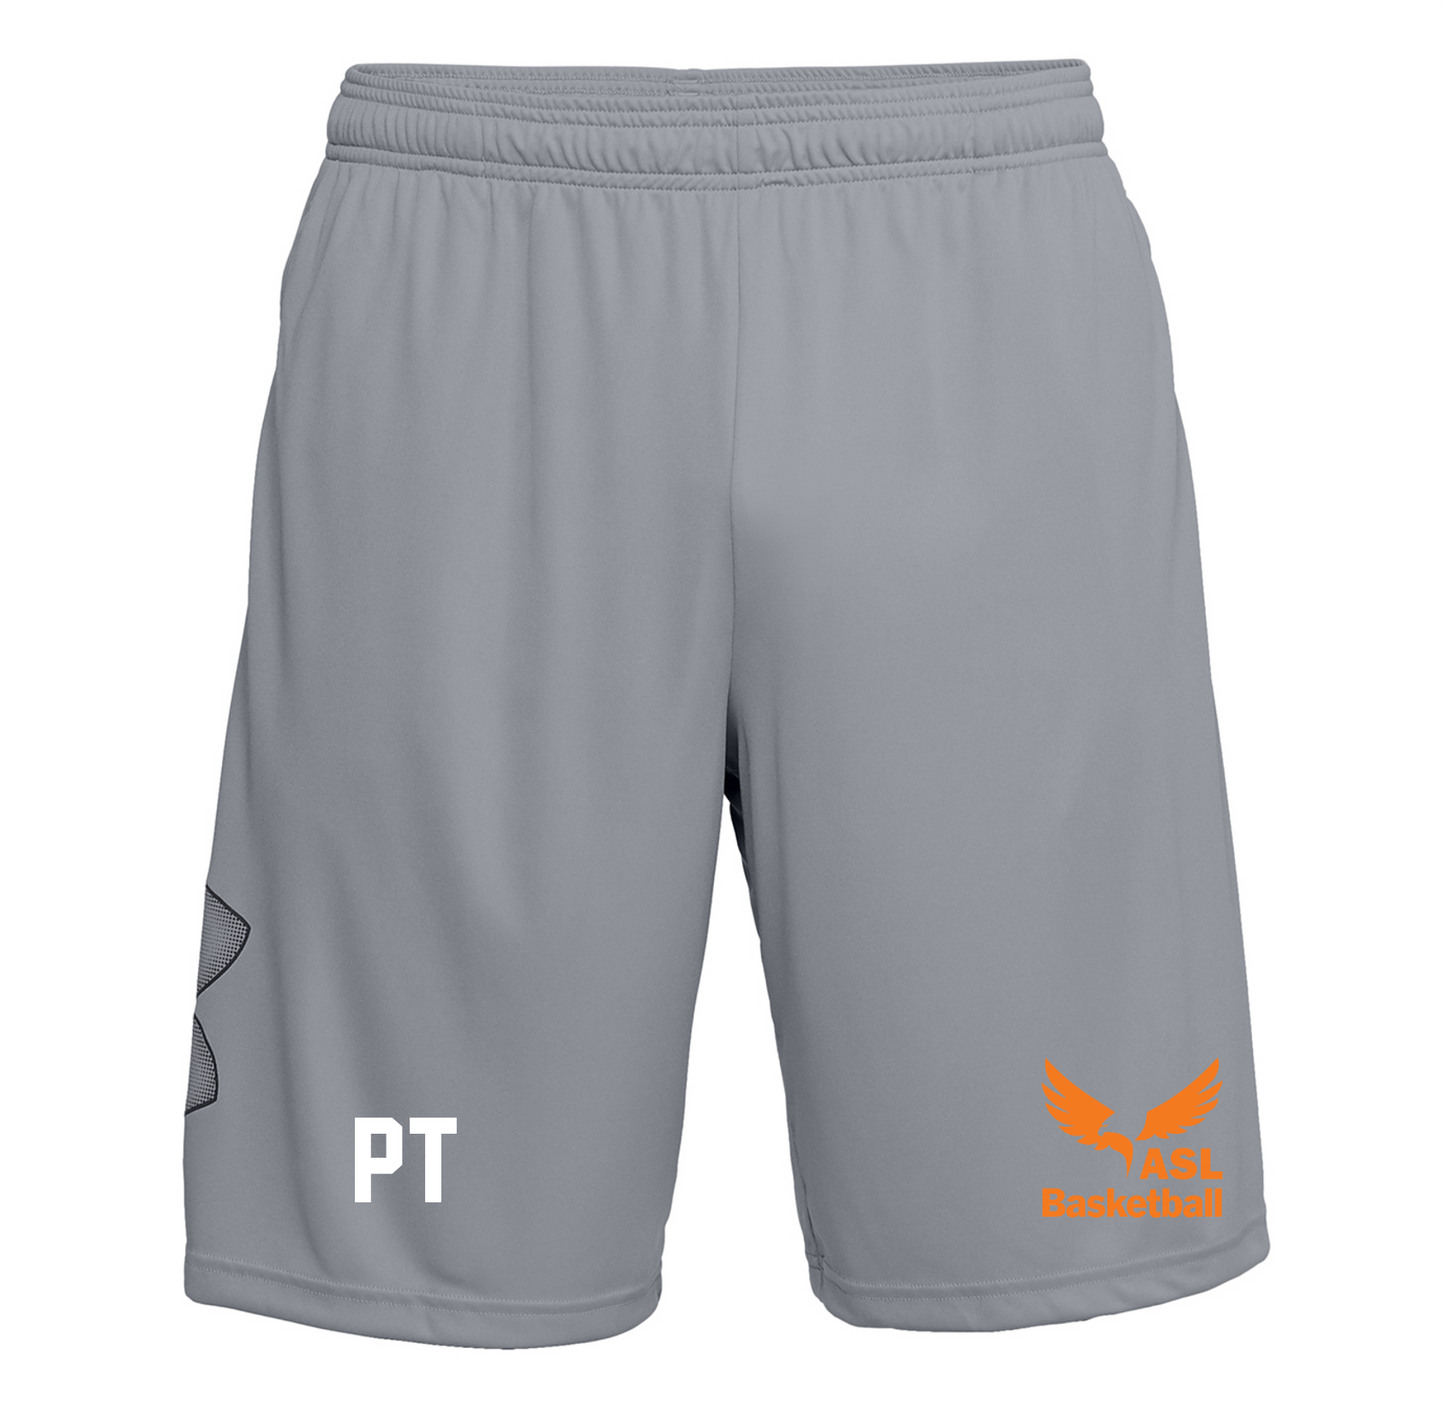 ASL Basketball Under Armour Graphic Tech Shorts